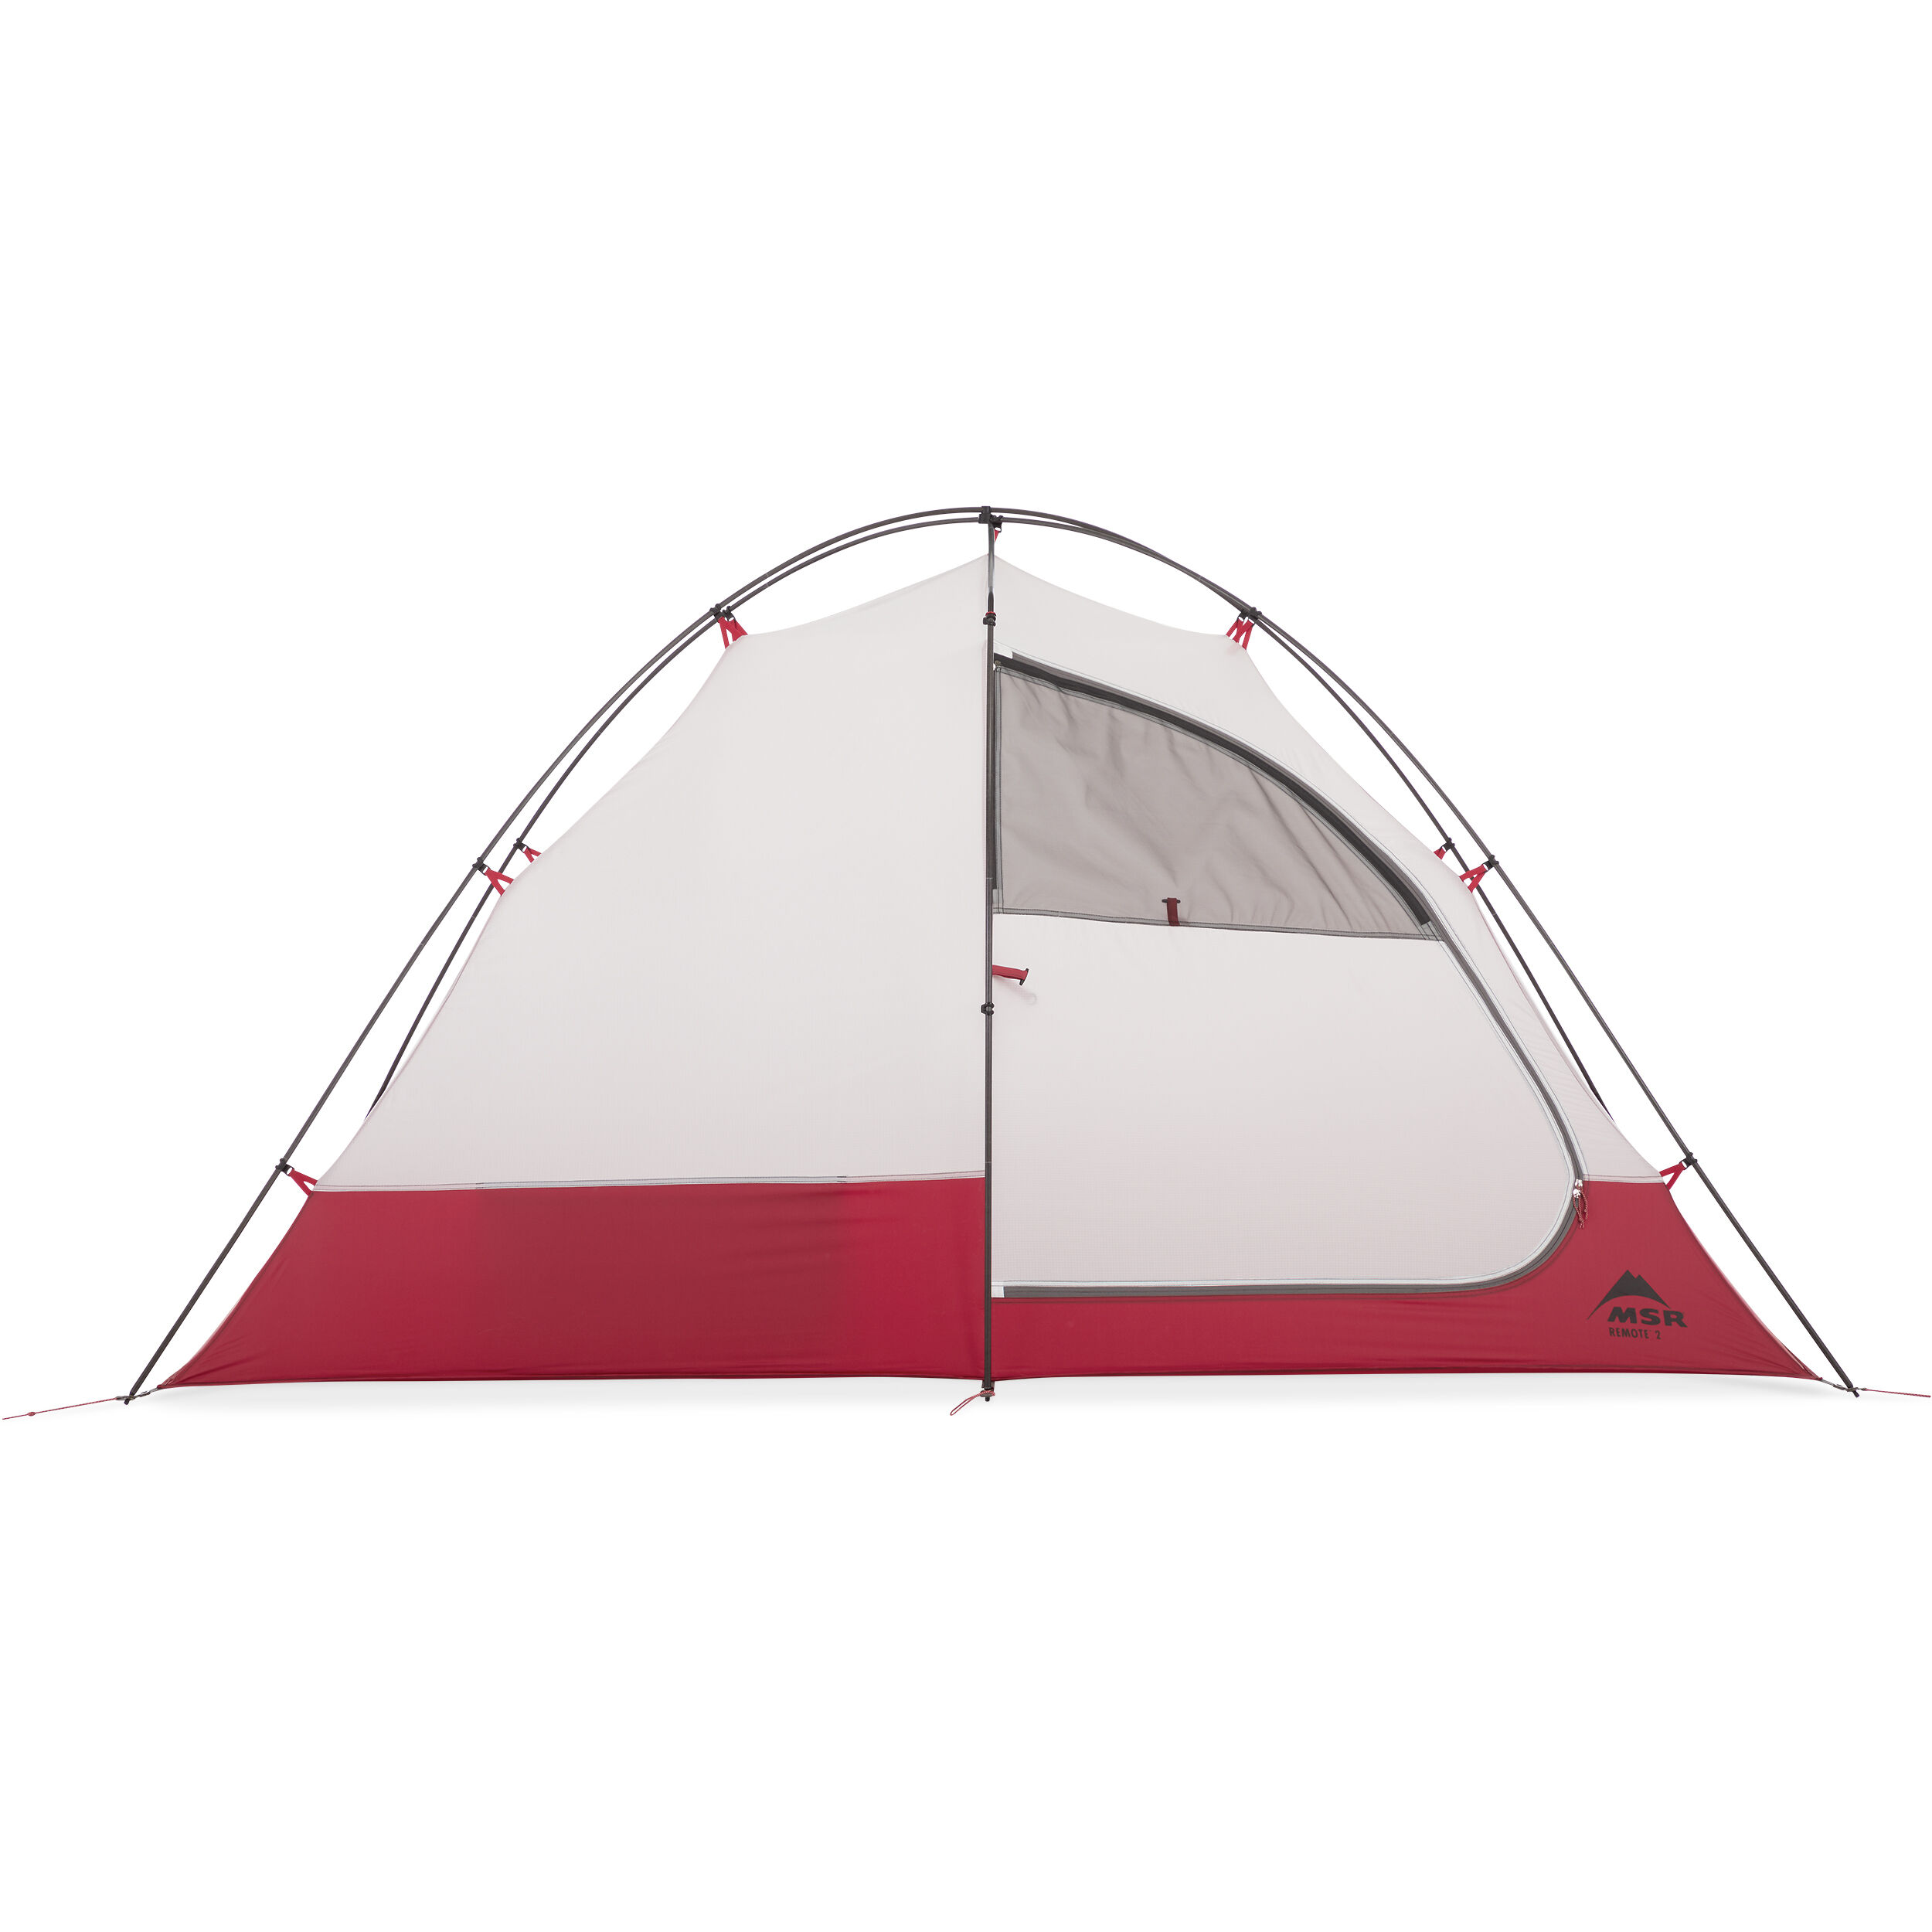 Remote™ 2 Two-Person Mountaineering Tent | All-Season Tents | MSR